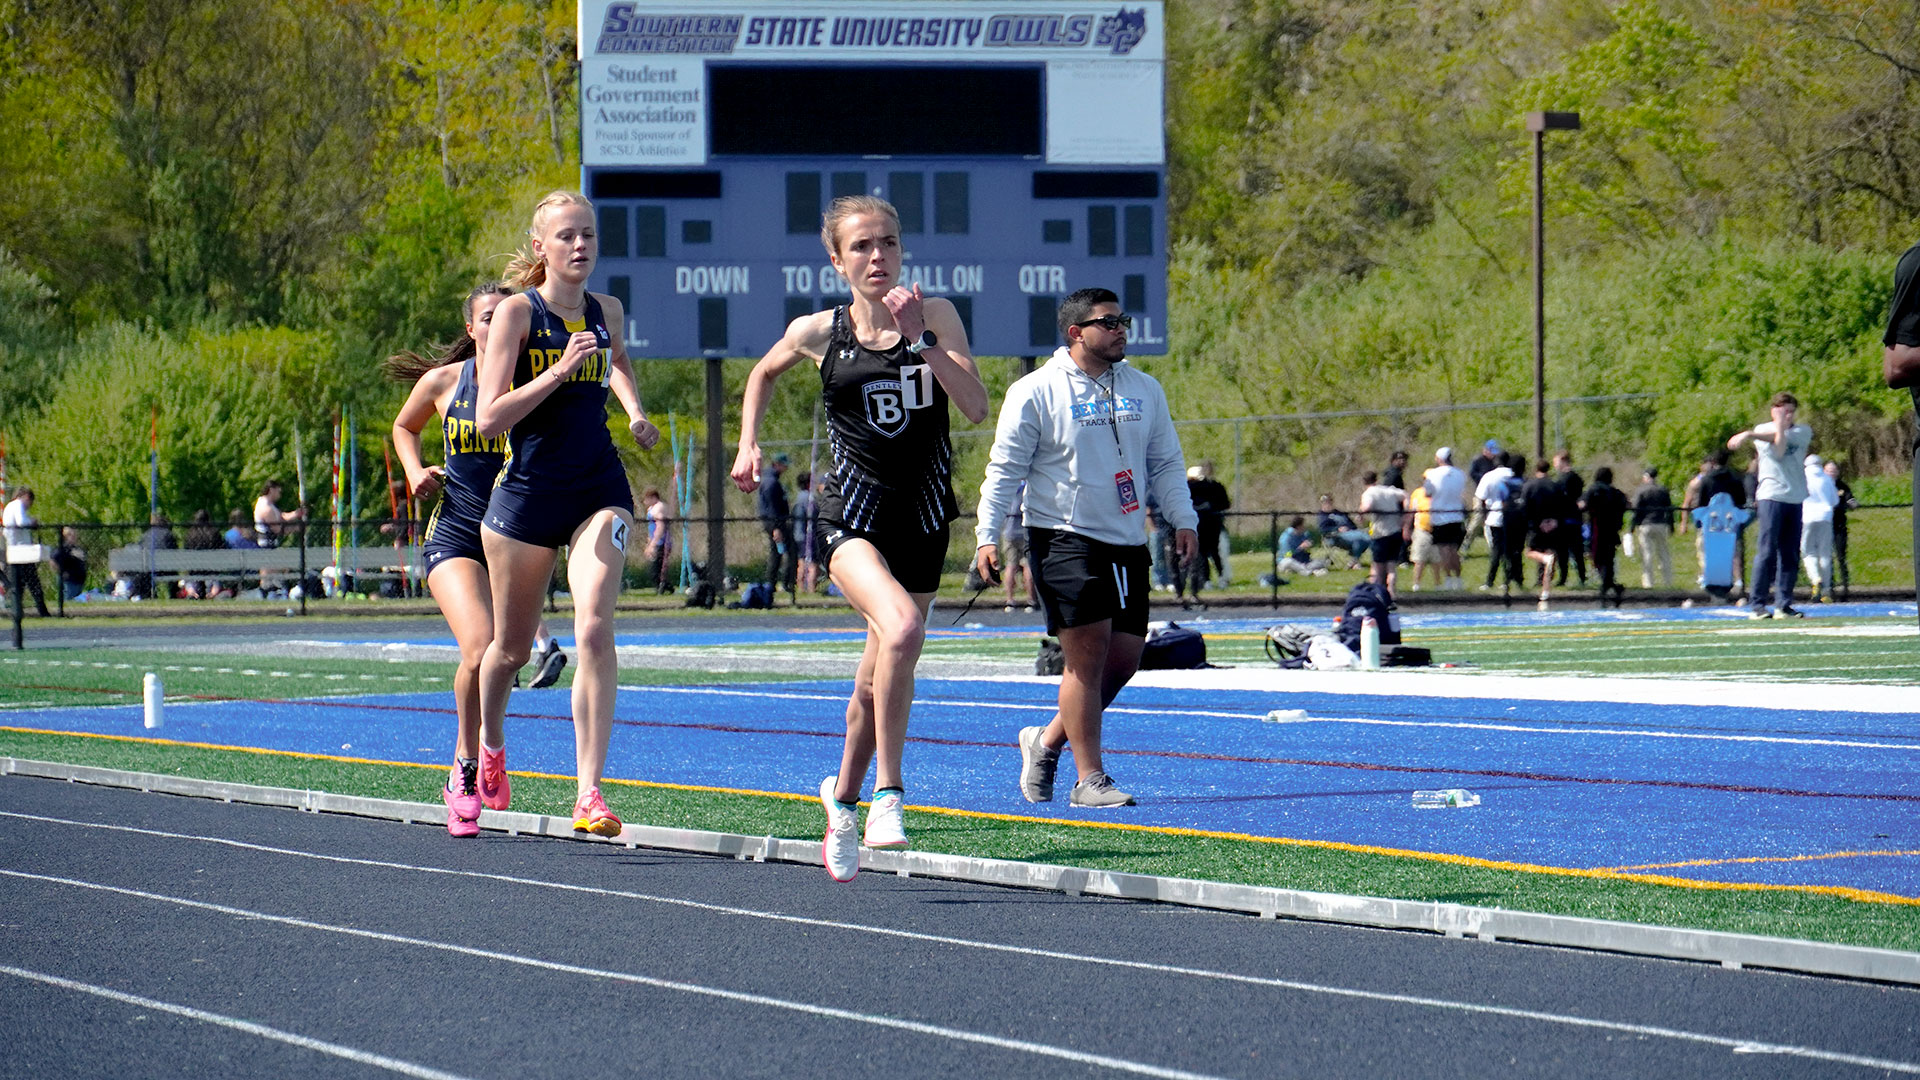 Capece named NE10 Rookie of the Year for women's outdoor track